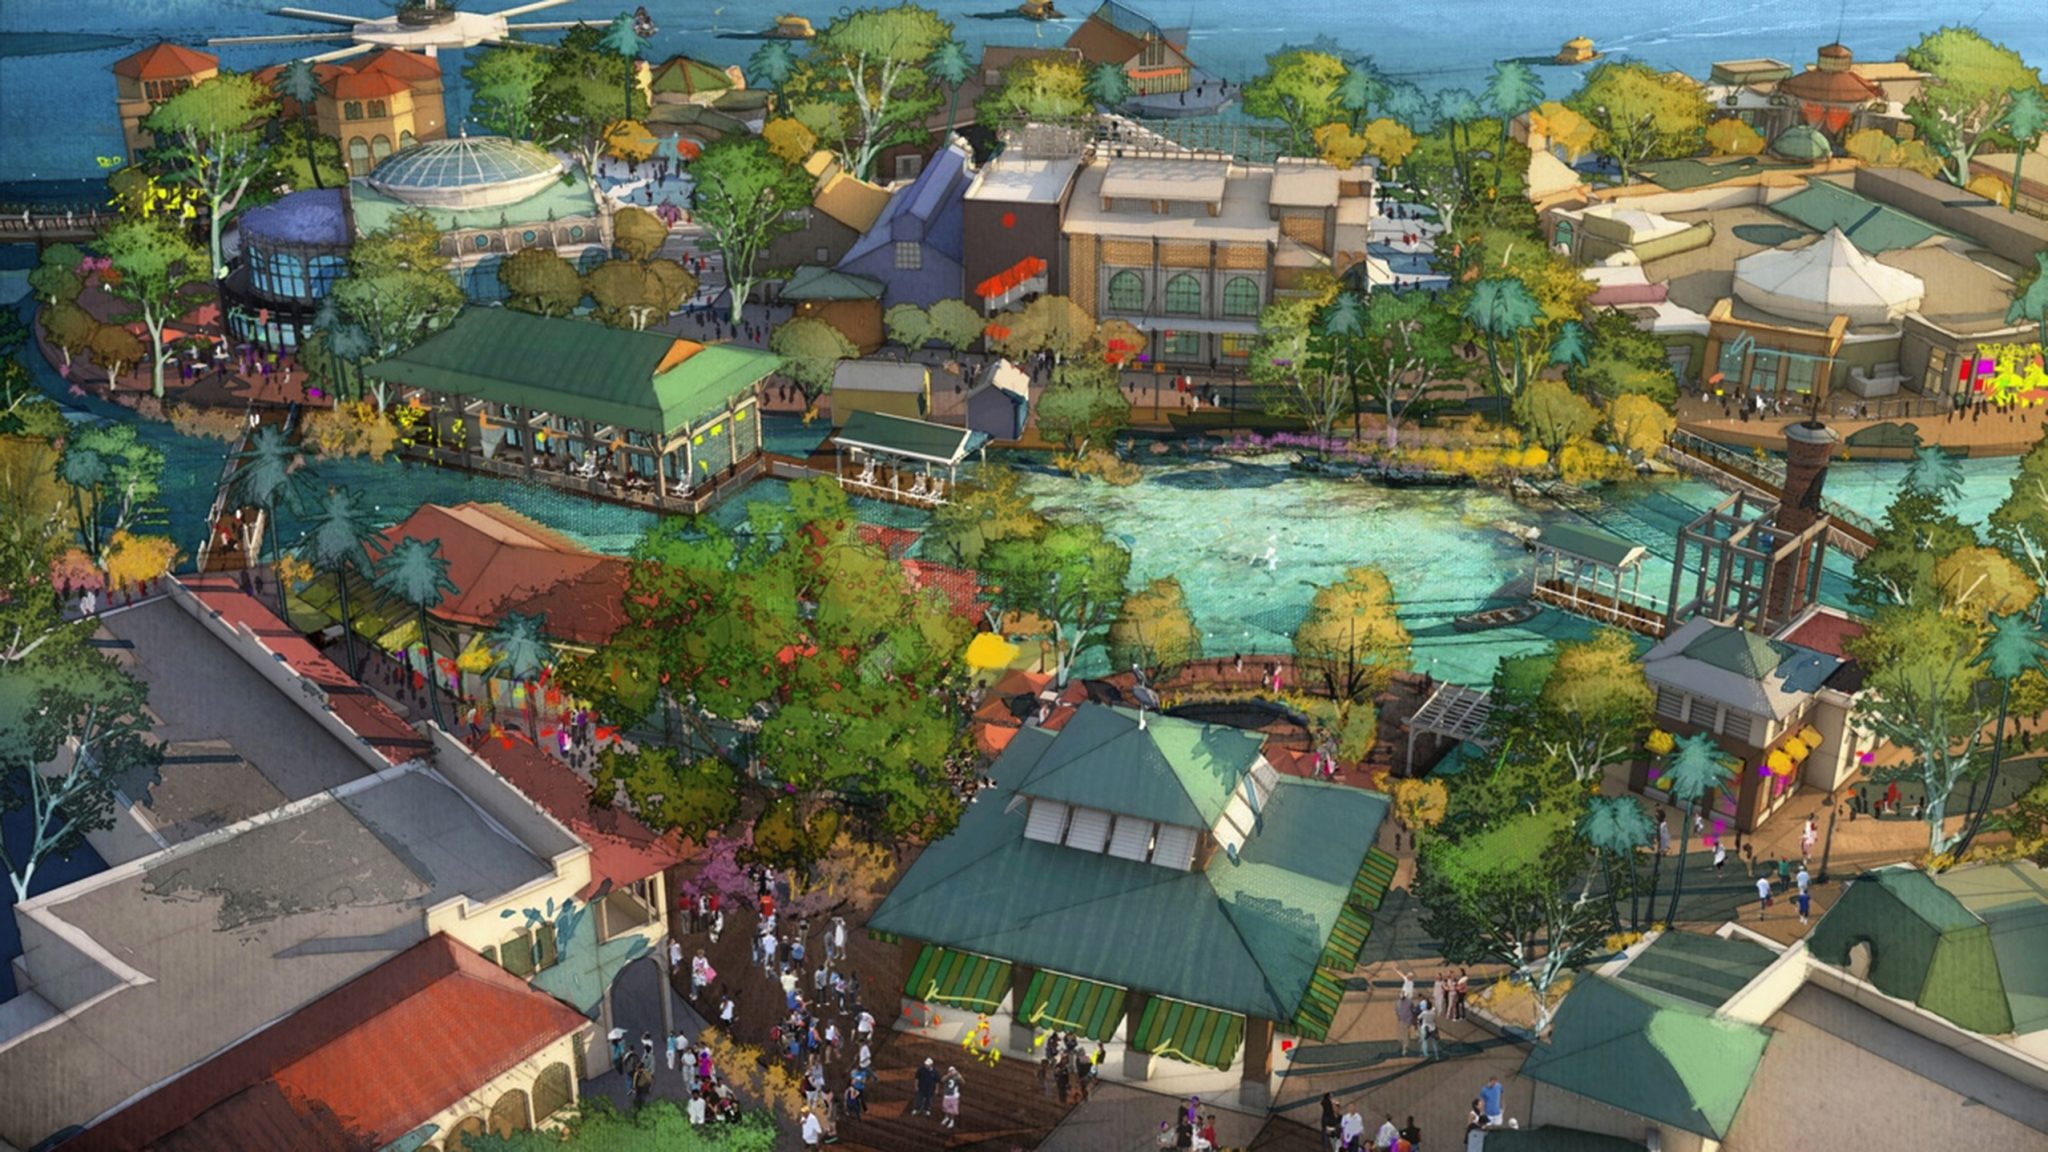 LAKE BUENA VISTA, Fla., March 12, 2013 – With a flowing spring as a centerpiece, Disney Springs will feature four outdoor neighborhoods including the two shown in an artist’s conceptual rendering. The Town Center (lower portion of the image) will offer one-of-a-kind shopping and dining experiences along a promenade while The Landing (upper portion of the image) will include inspired dining and beautiful waterfront views.